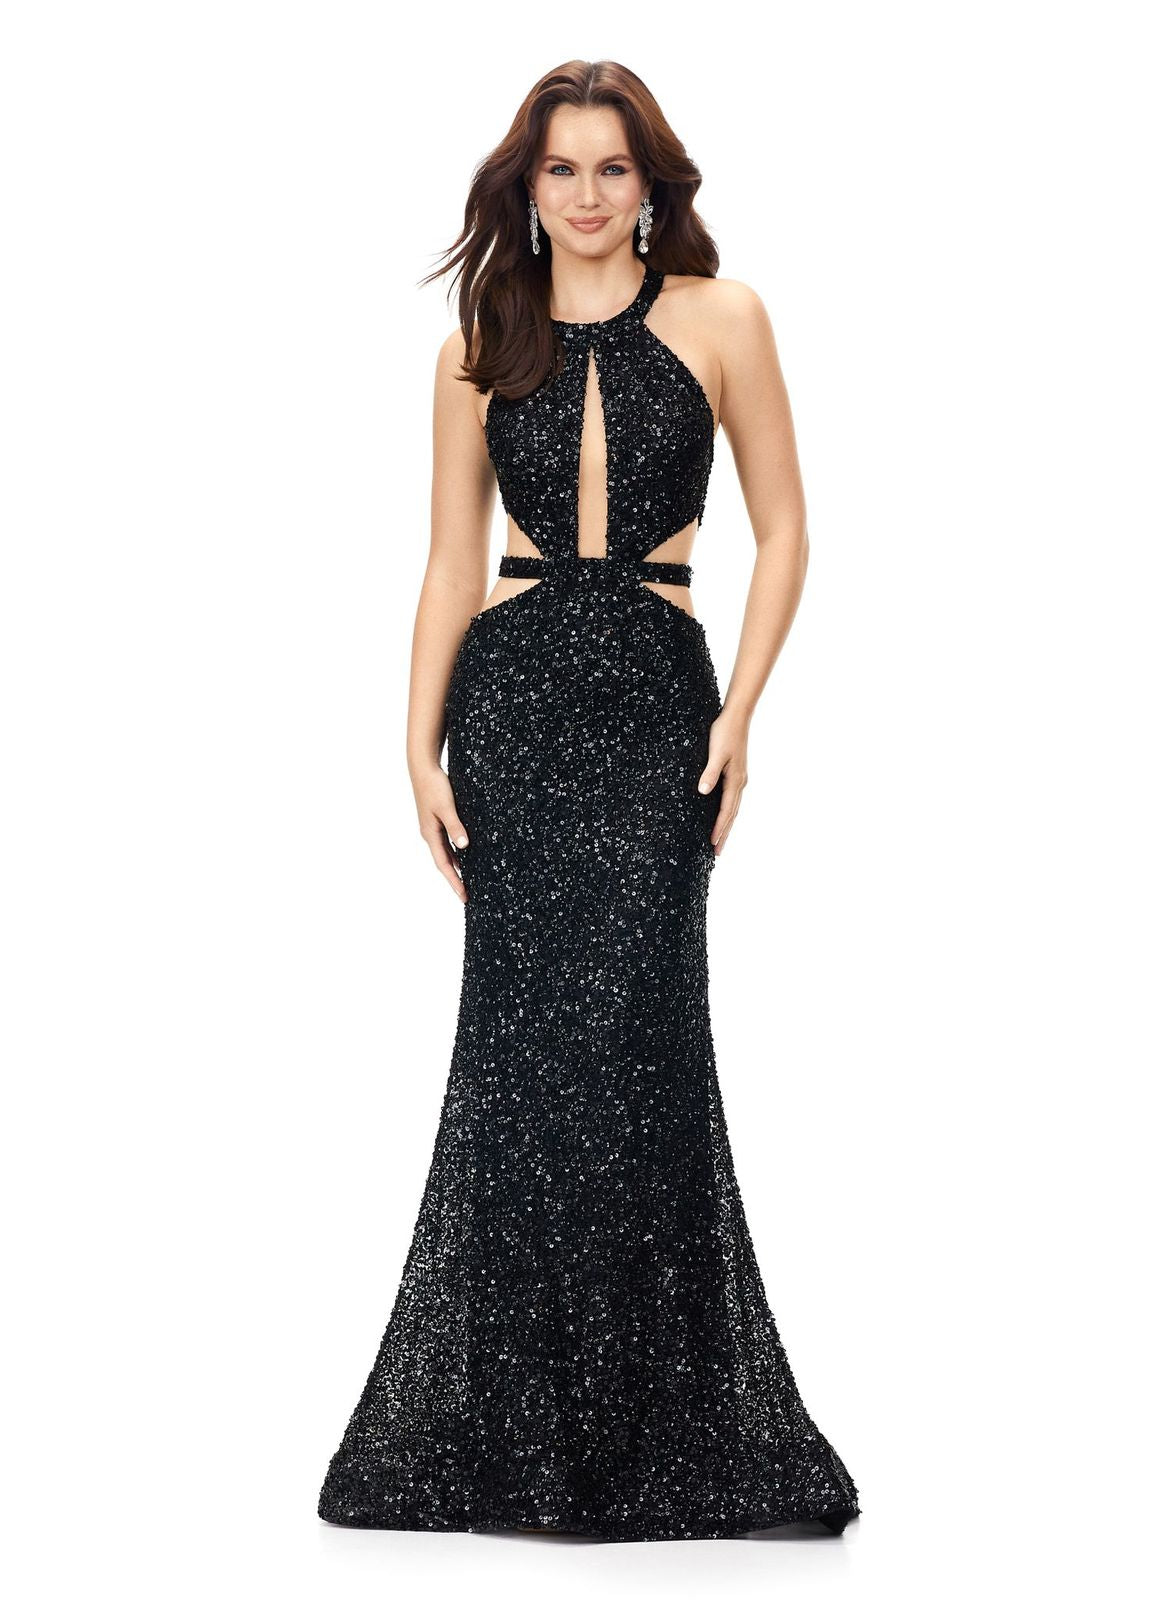 Ashley Lauren 11286 Fully Sequin Dress with Cut Outs